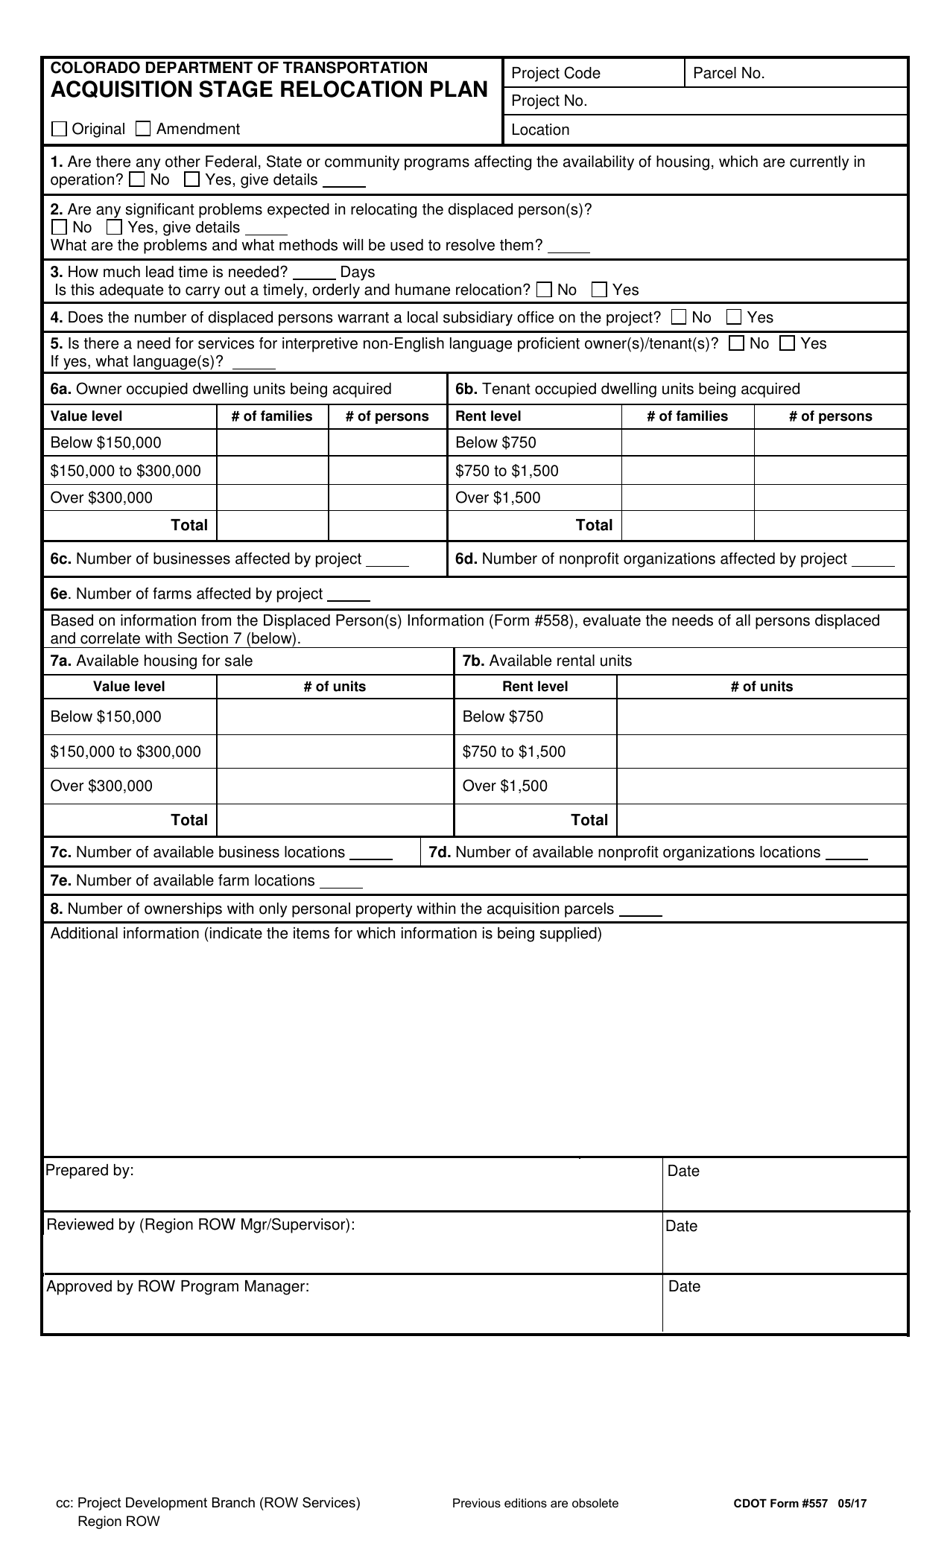 CDOT Form 557 Acquisition Stage Relocation Plan - Colorado, Page 1